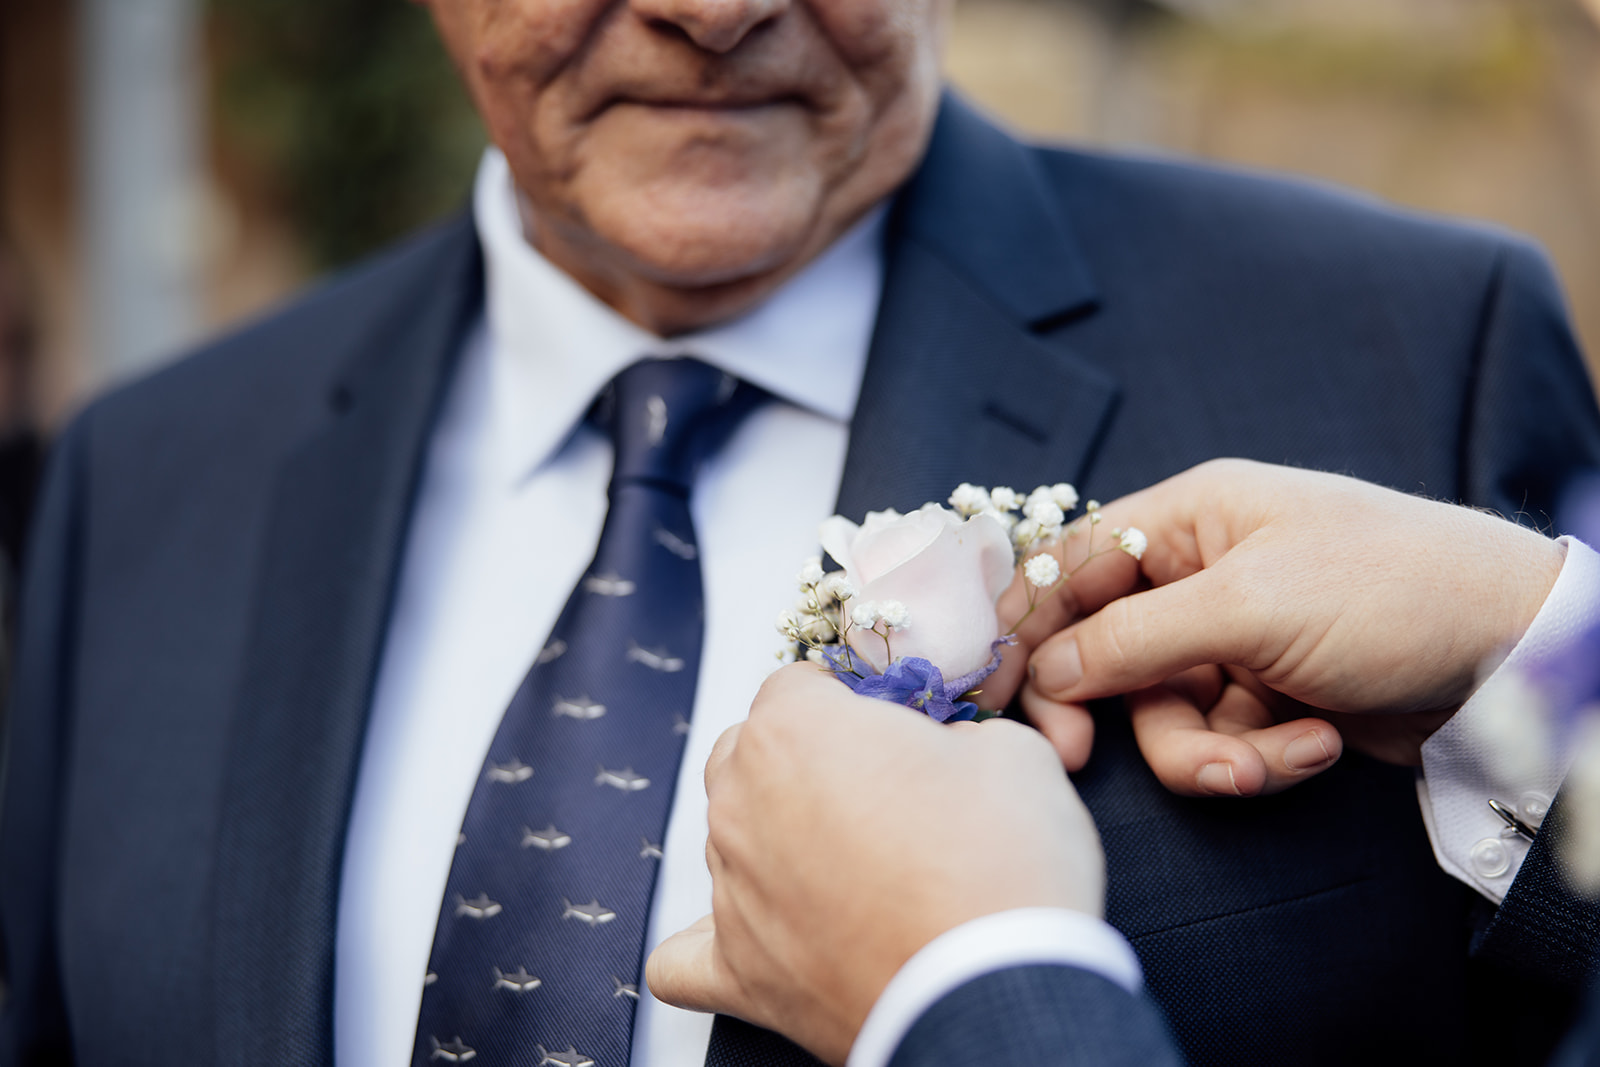 A man in a suit getting a boutonniere put on